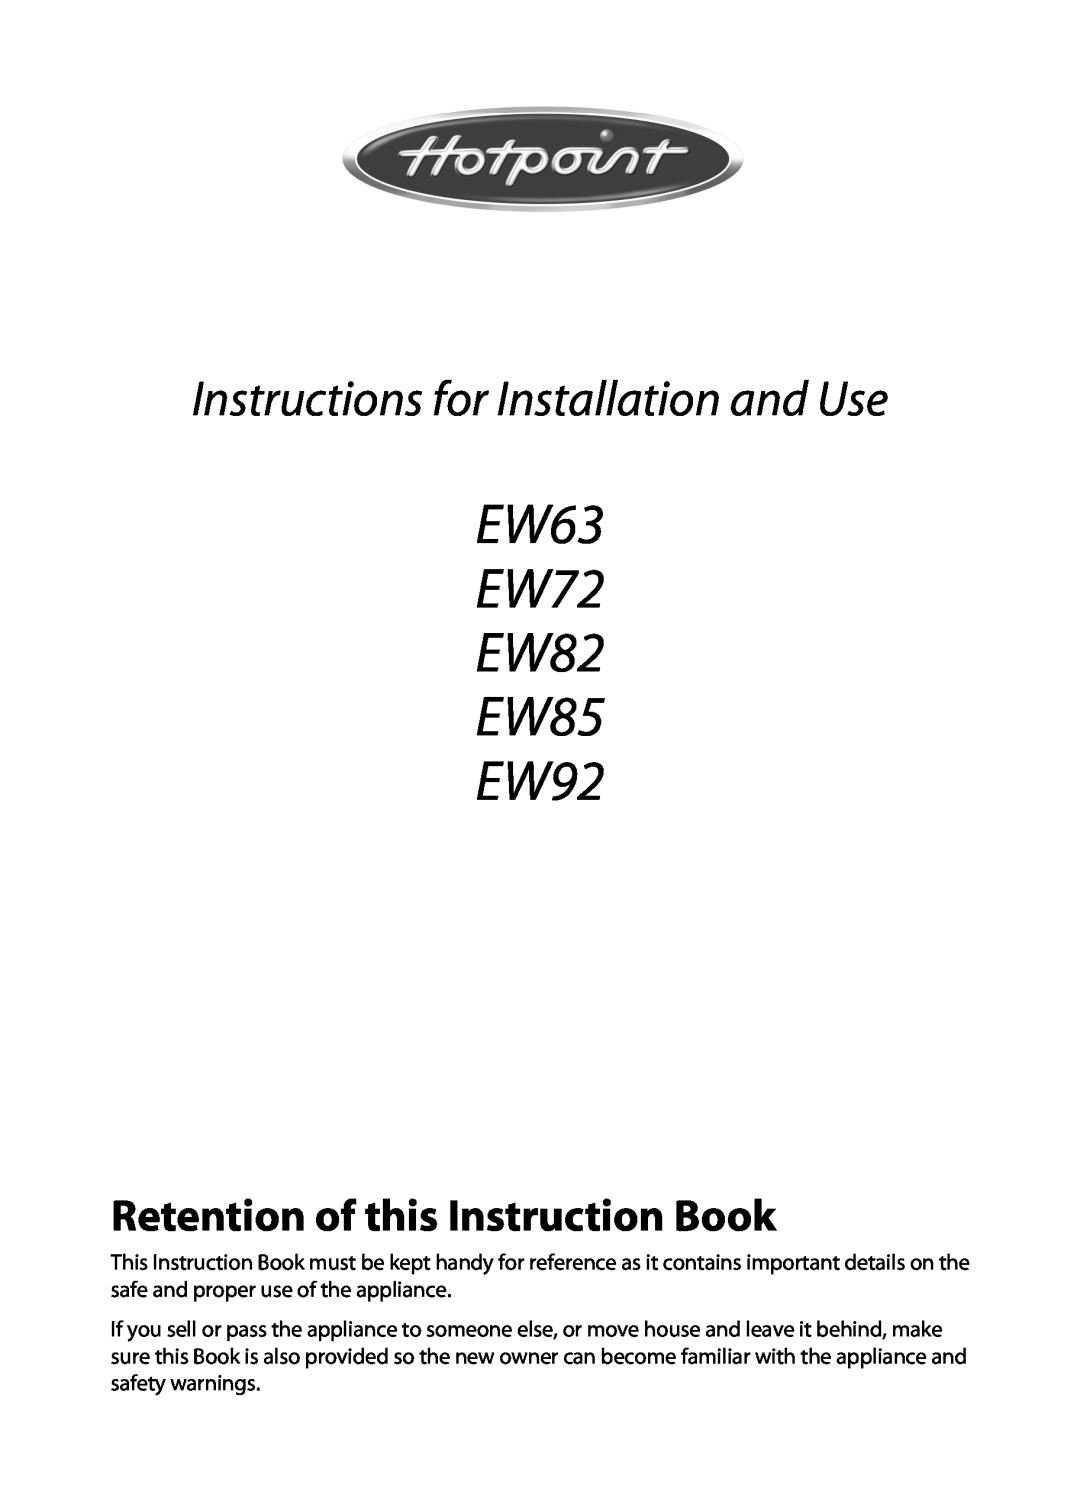 Hotpoint manual Retention of this Instruction Book, EW63 EW72 EW82 EW85 EW92, Instructions for Installation and Use 